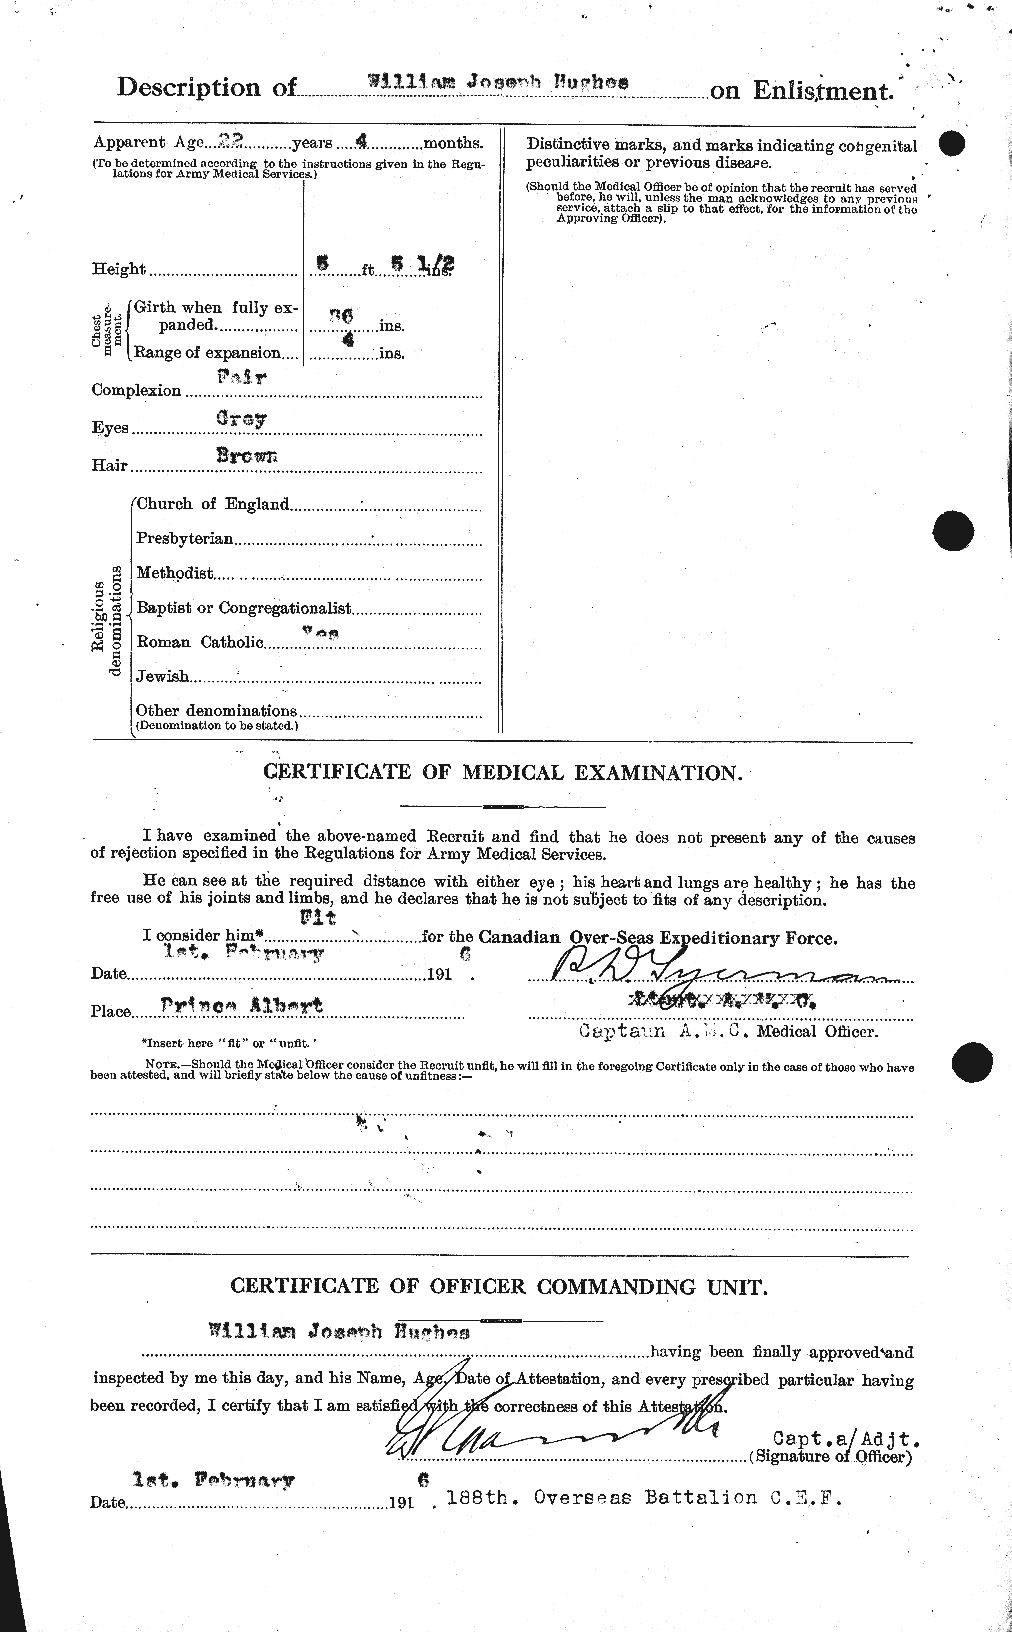 Personnel Records of the First World War - CEF 405948b